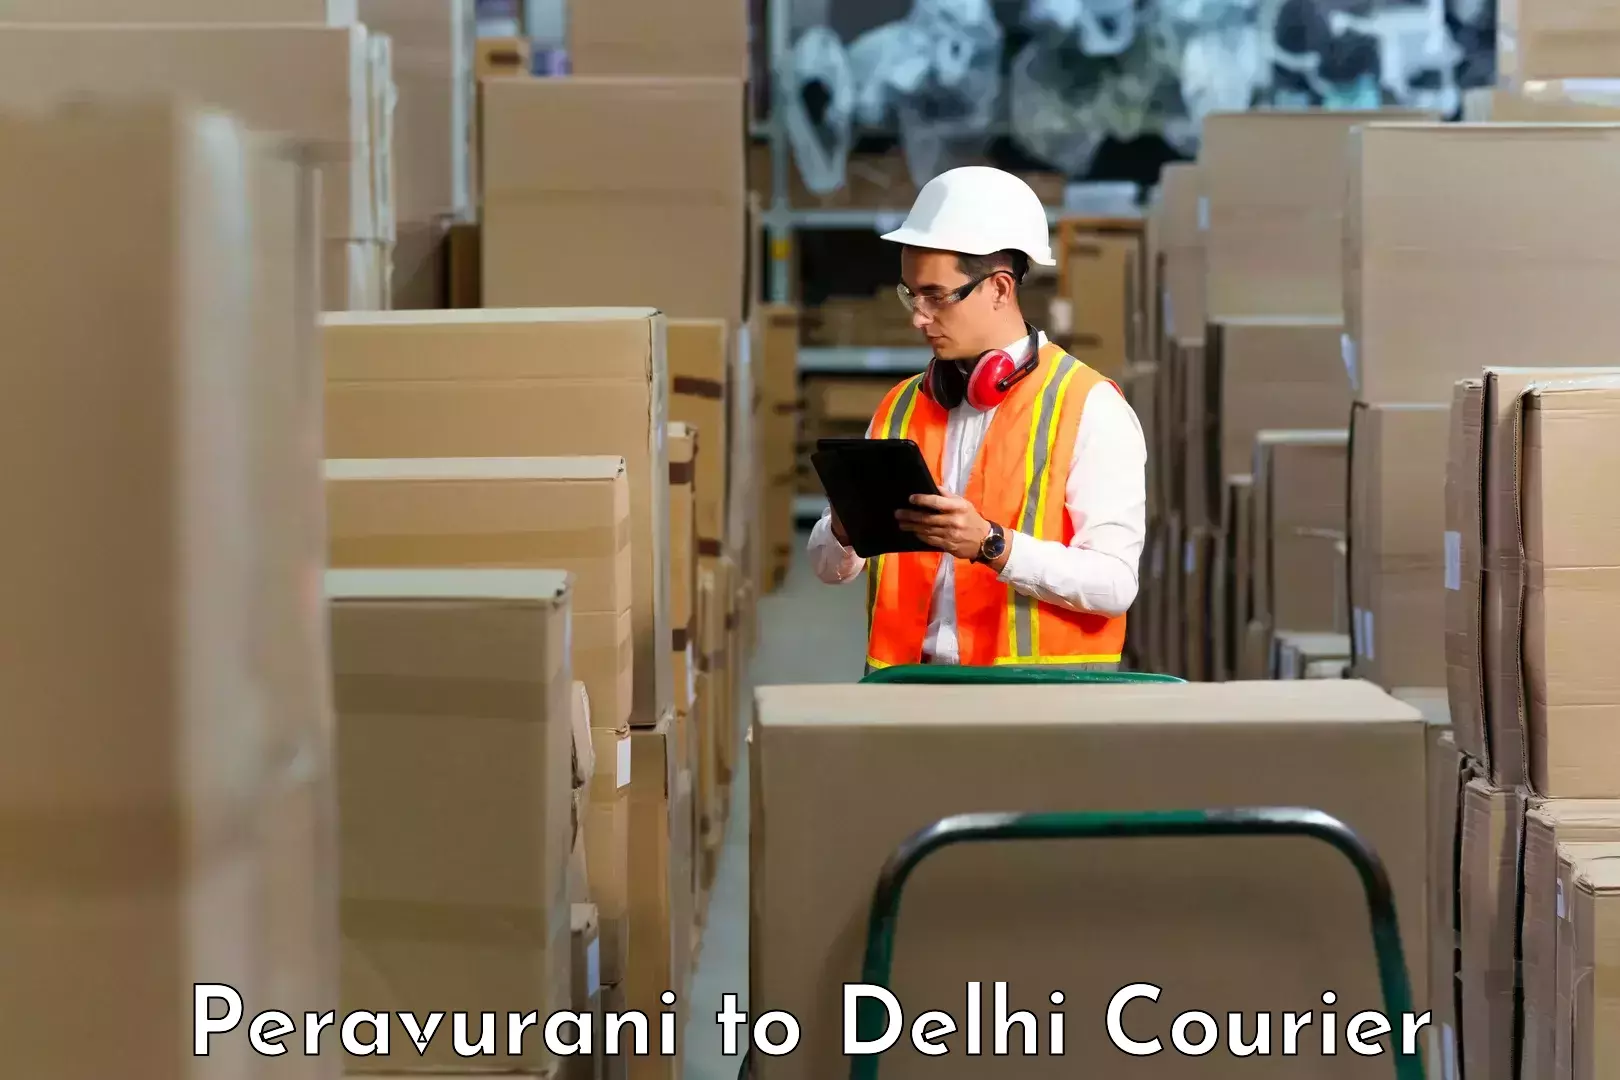 Next-day delivery options Peravurani to NCR